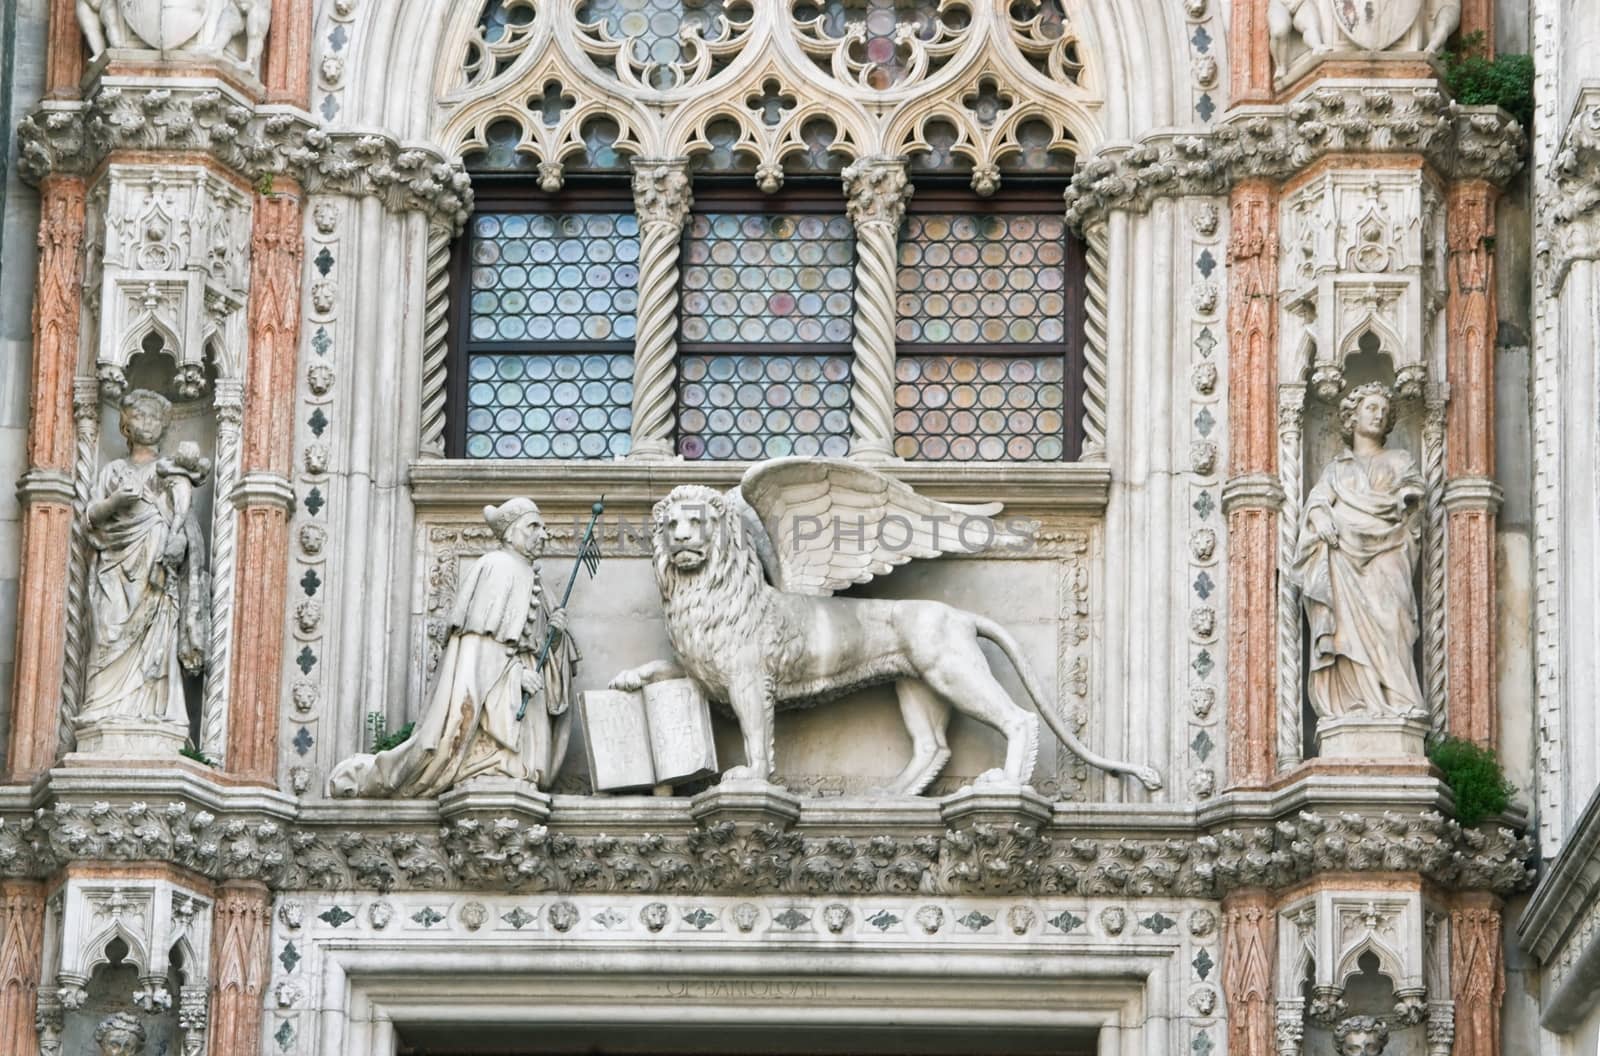 Decor and Statues Cathedral of San Marco and the Doge image of a winged lion - the symbol of Venice